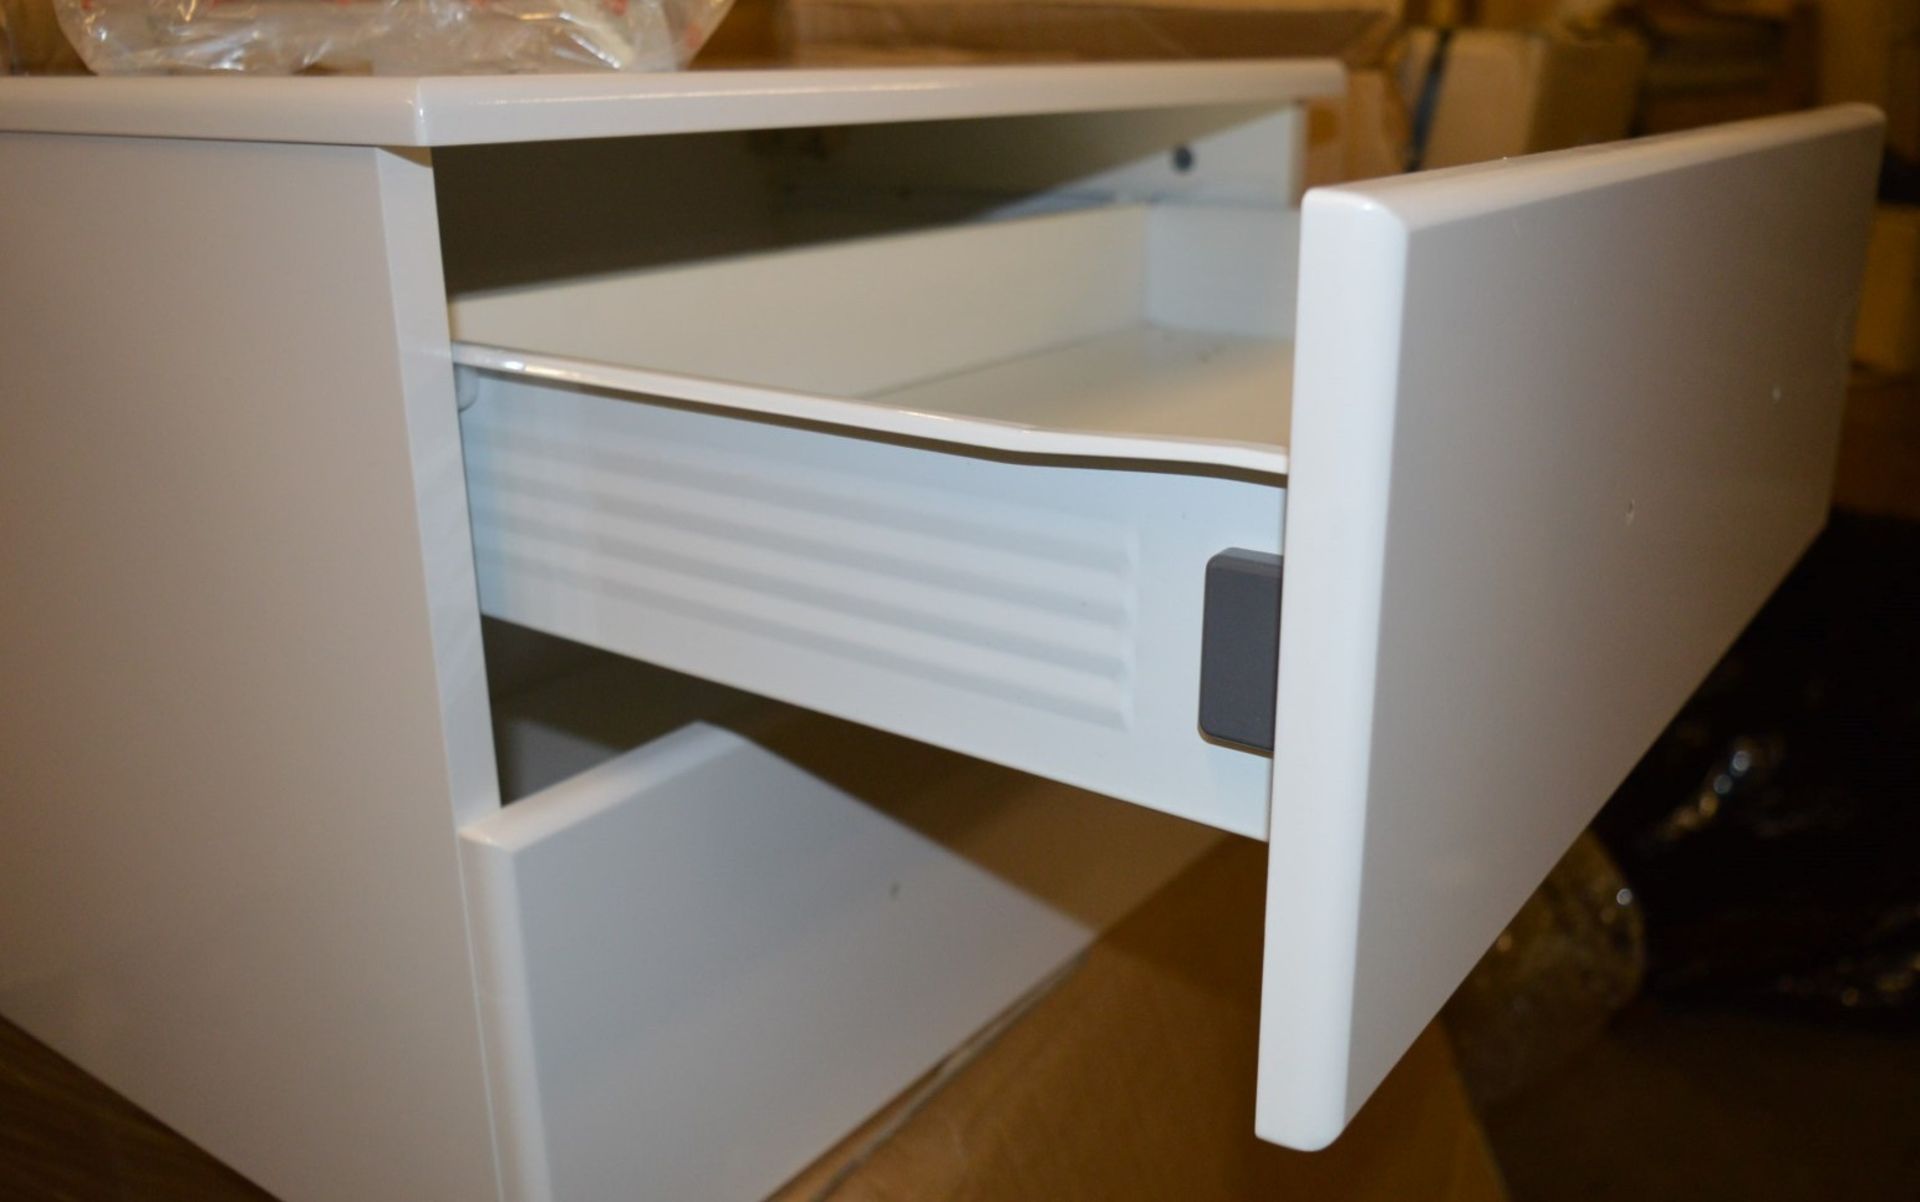 1 x Venizia Wall Hung Drawer Unit in White Gloss - H40 x W55 x D40 cms  - Includes Metal Drawer - Image 4 of 6